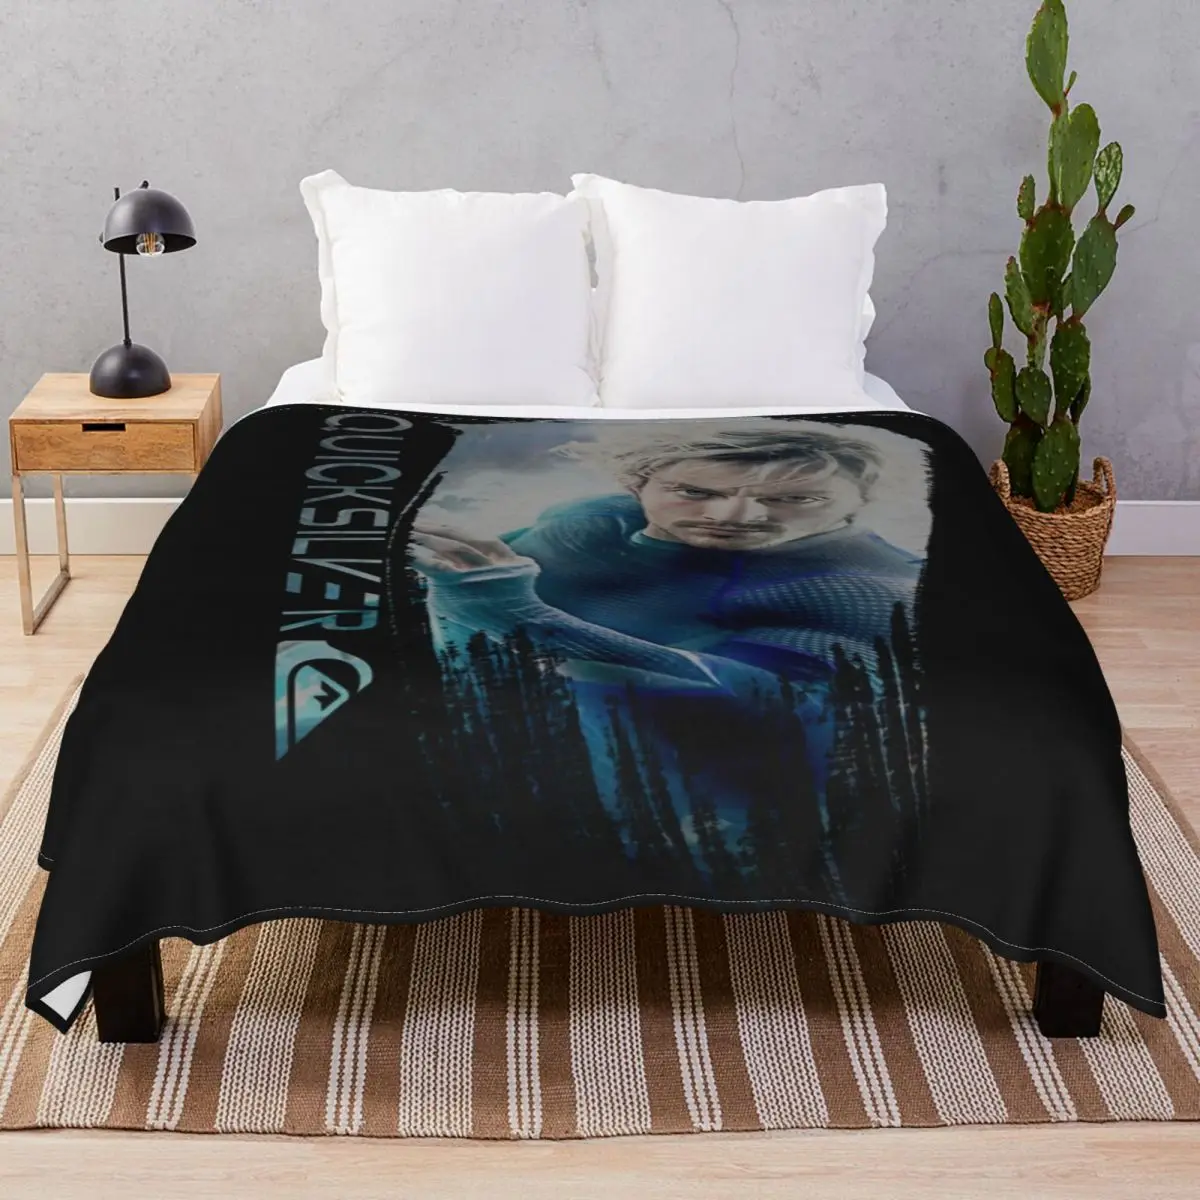 Quicksilver Blankets Flannel Summer Multi-function Throw Blanket for Bed Home Couch Travel Cinema